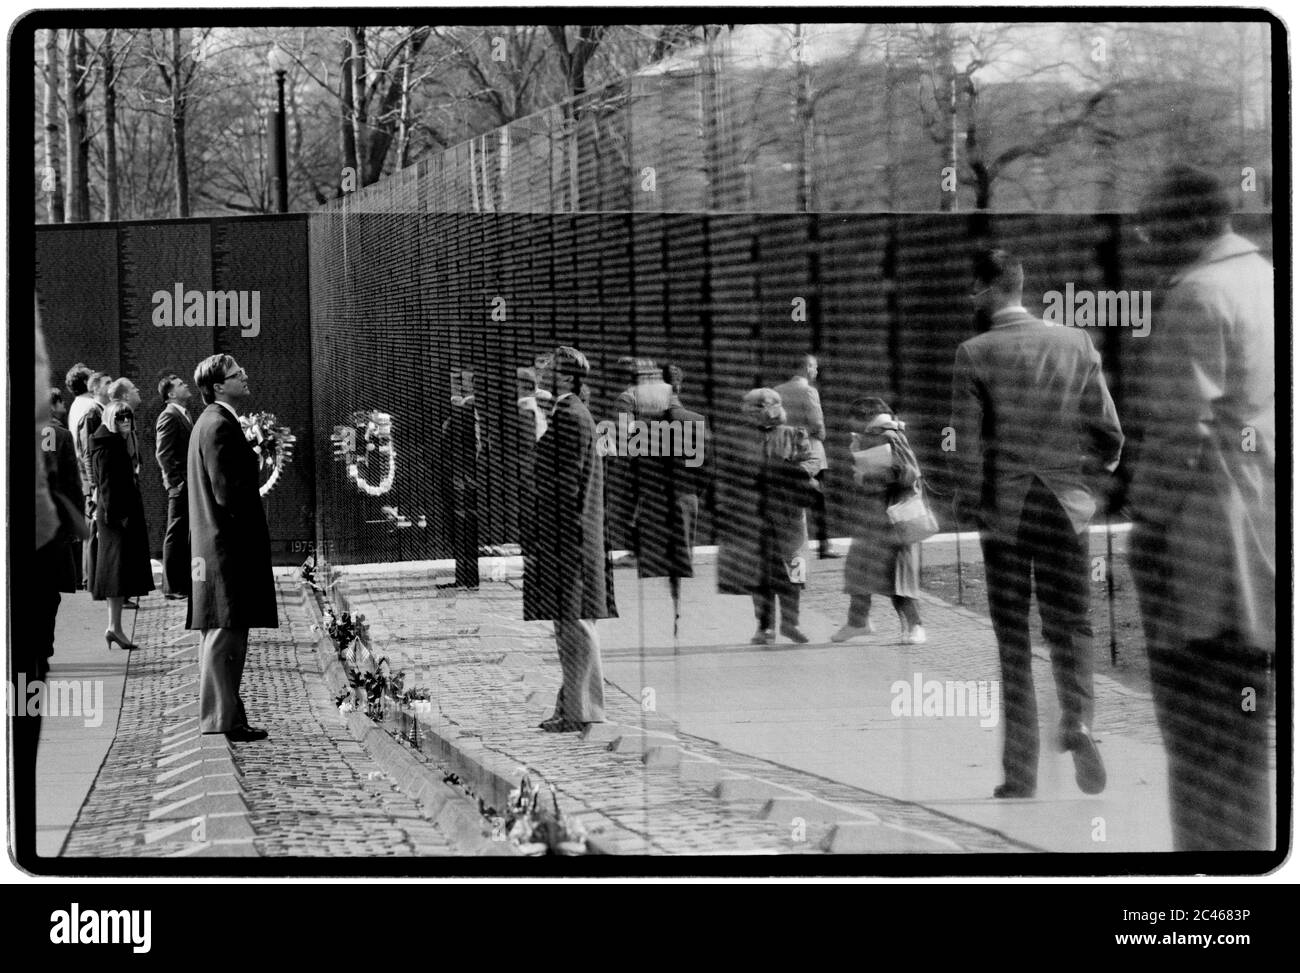 The Vietnam Veterans Memorial is a 2-acre (8,093.71 m²) U.S. national memorial in Washington, D.C. It honors service members of the U.S. armed forces who fought in the Vietnam War, service members who died in service in Vietnam/South East Asia, and those service members who were unaccounted for during the war. Stock Photo